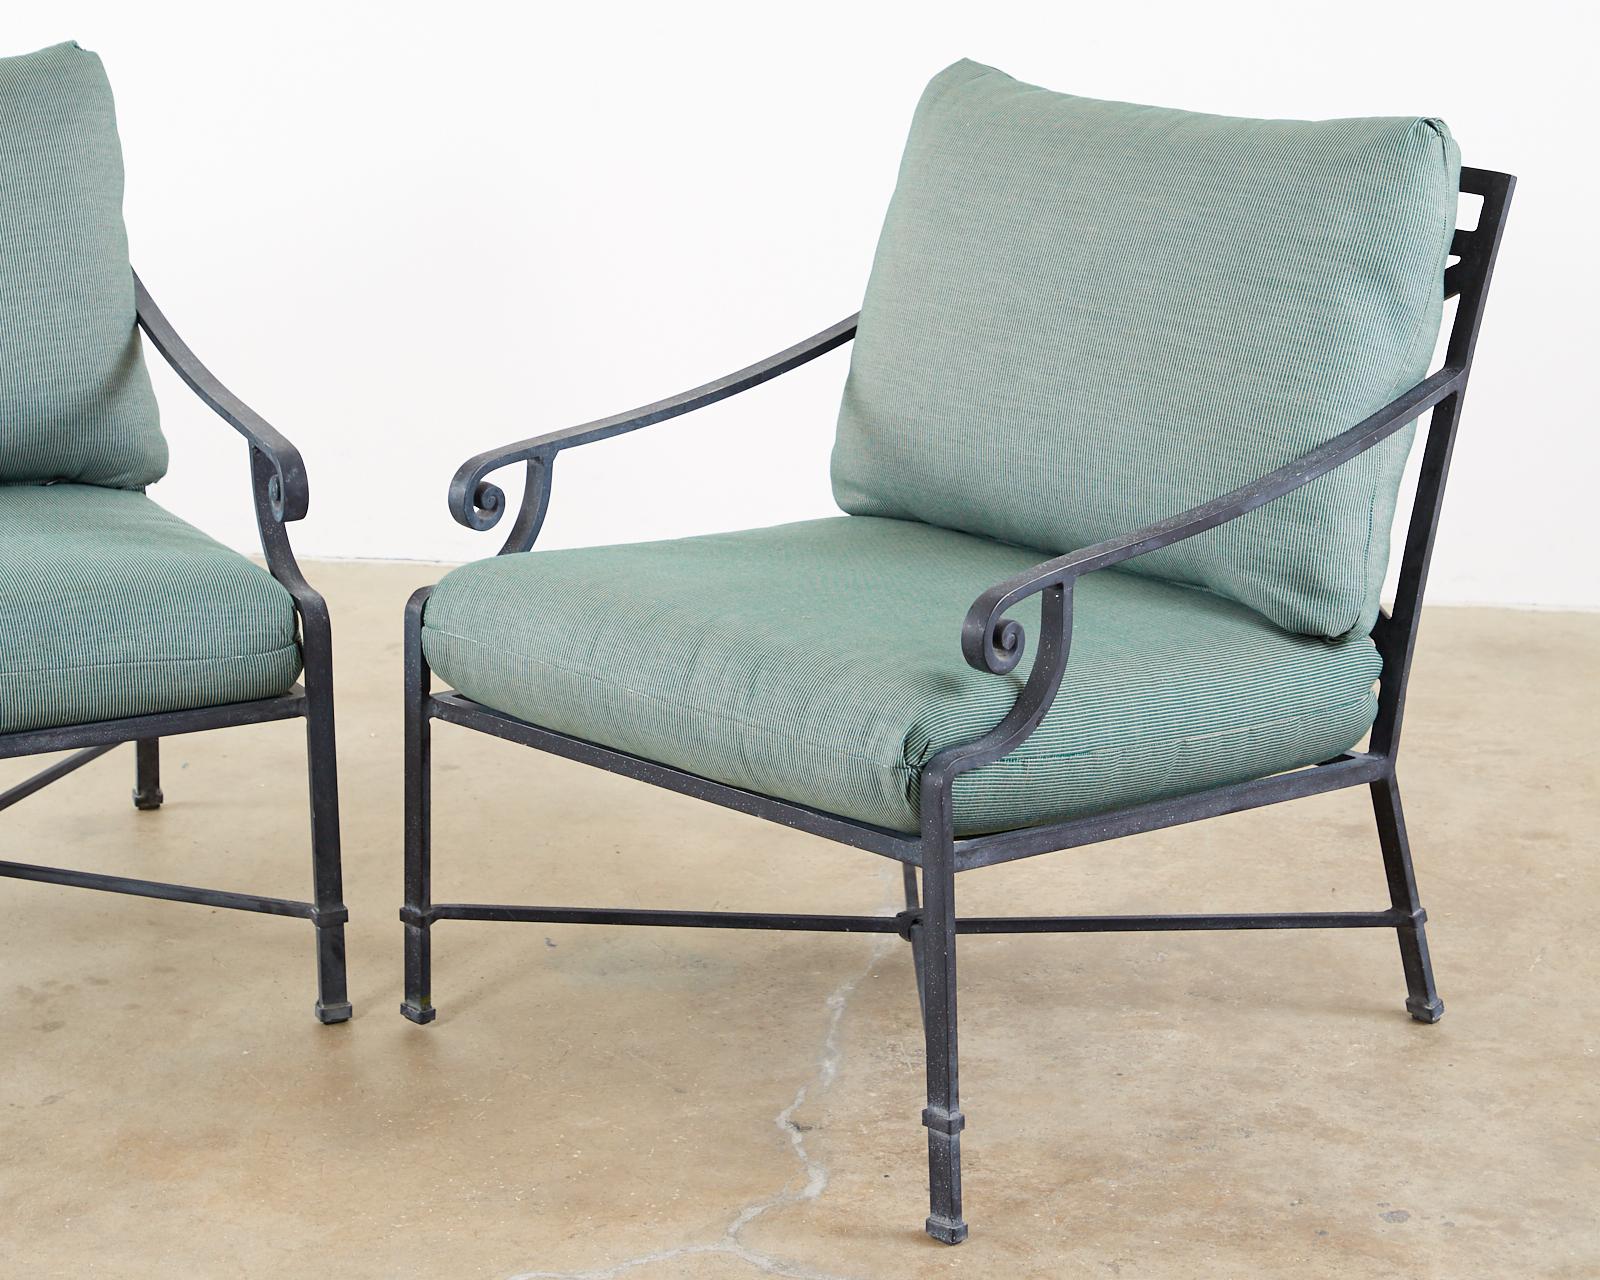 Generous pair of patio and garden lounge chairs made by Brown Jordan. Constructed from wrought aluminum with a multi-step powder-coated finish. The black patina has faint silver and gold flecks on the finish. Known as Brown Jordan's Venetian design.